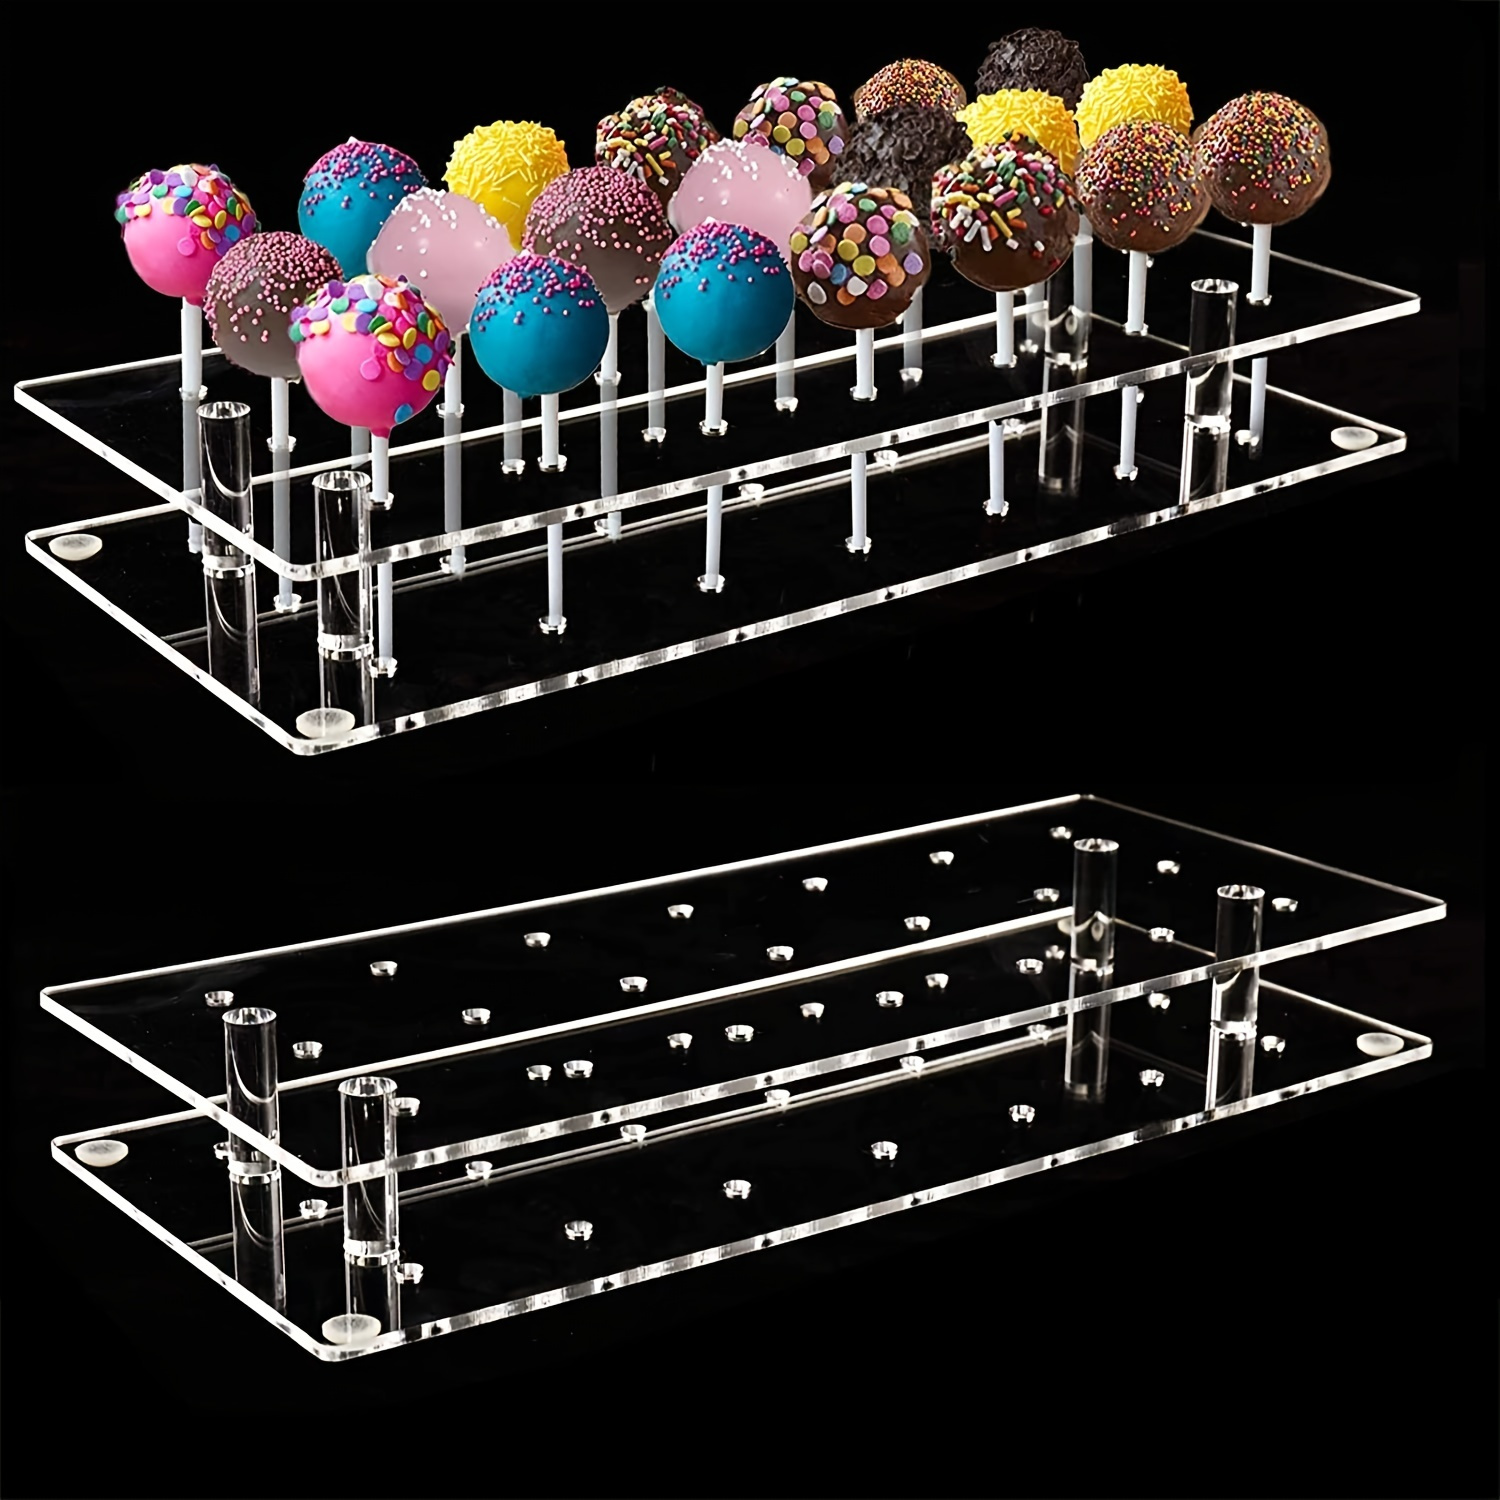 

1pc Clear Acrylic Cake Pop Display Stand - 21 Hole Lollipop Holder For Weddings, Baby Showers, Birthdays, Anniversaries, Halloween, And More - Easy To Use And Eye-catching